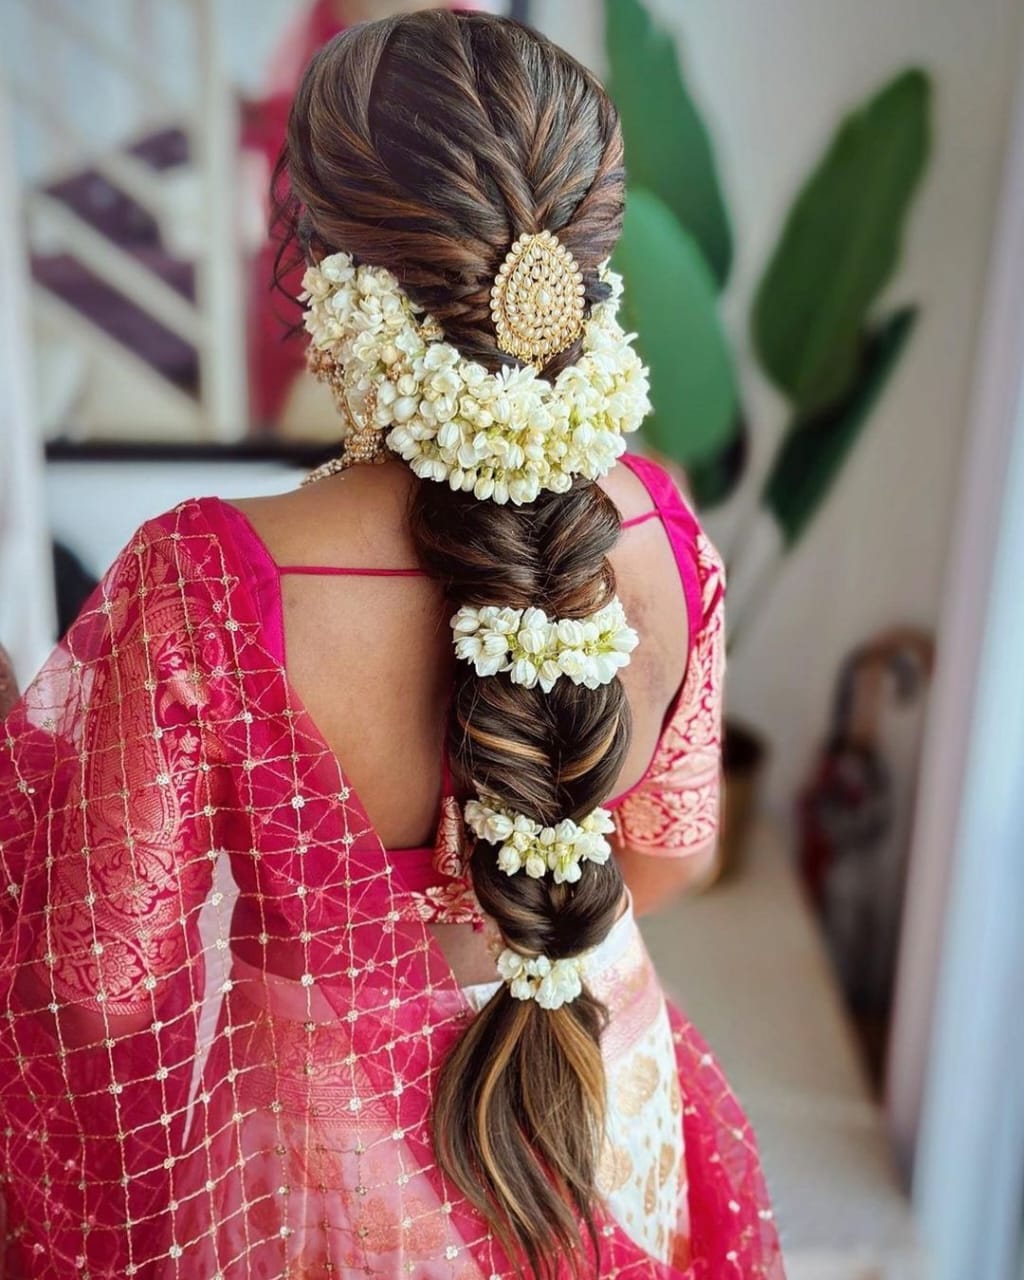 Make Your Look More Charming With These Bridal Hairstyles 2020 | Hair style  on saree, Lehenga hairstyles, Saree hairstyles